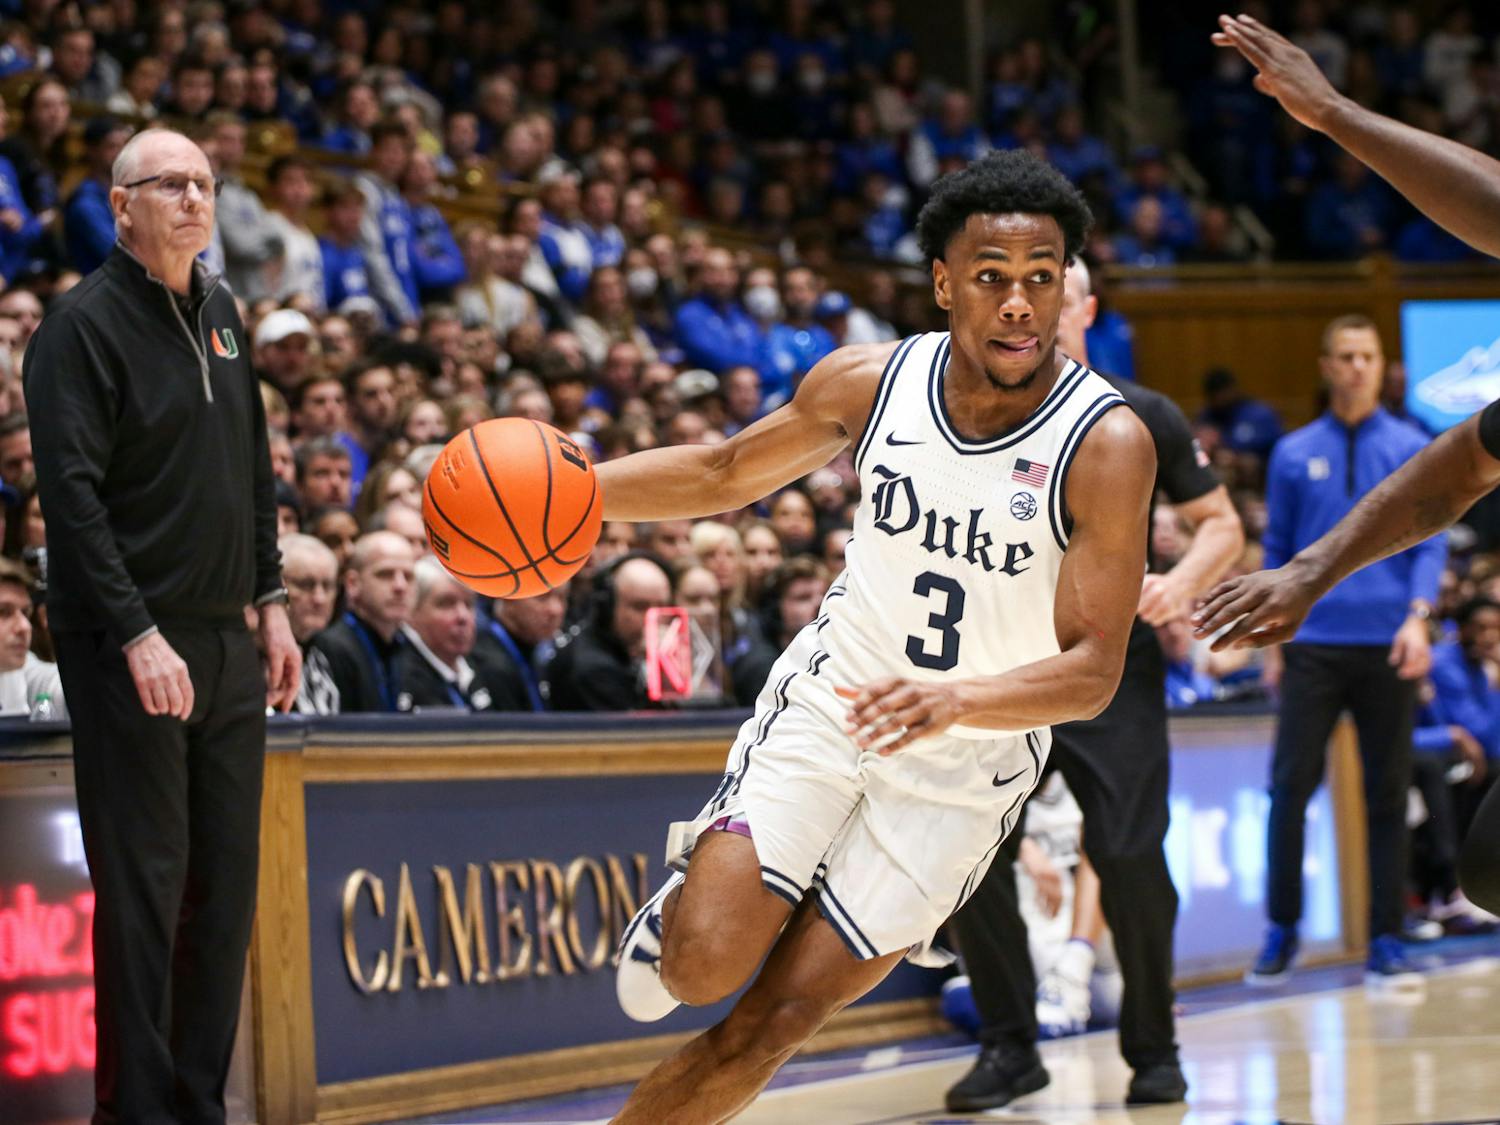 Jeremy Roach drives with the ball in Duke's Jan. 21 win against Miami at Cameron Indoor Stadium.